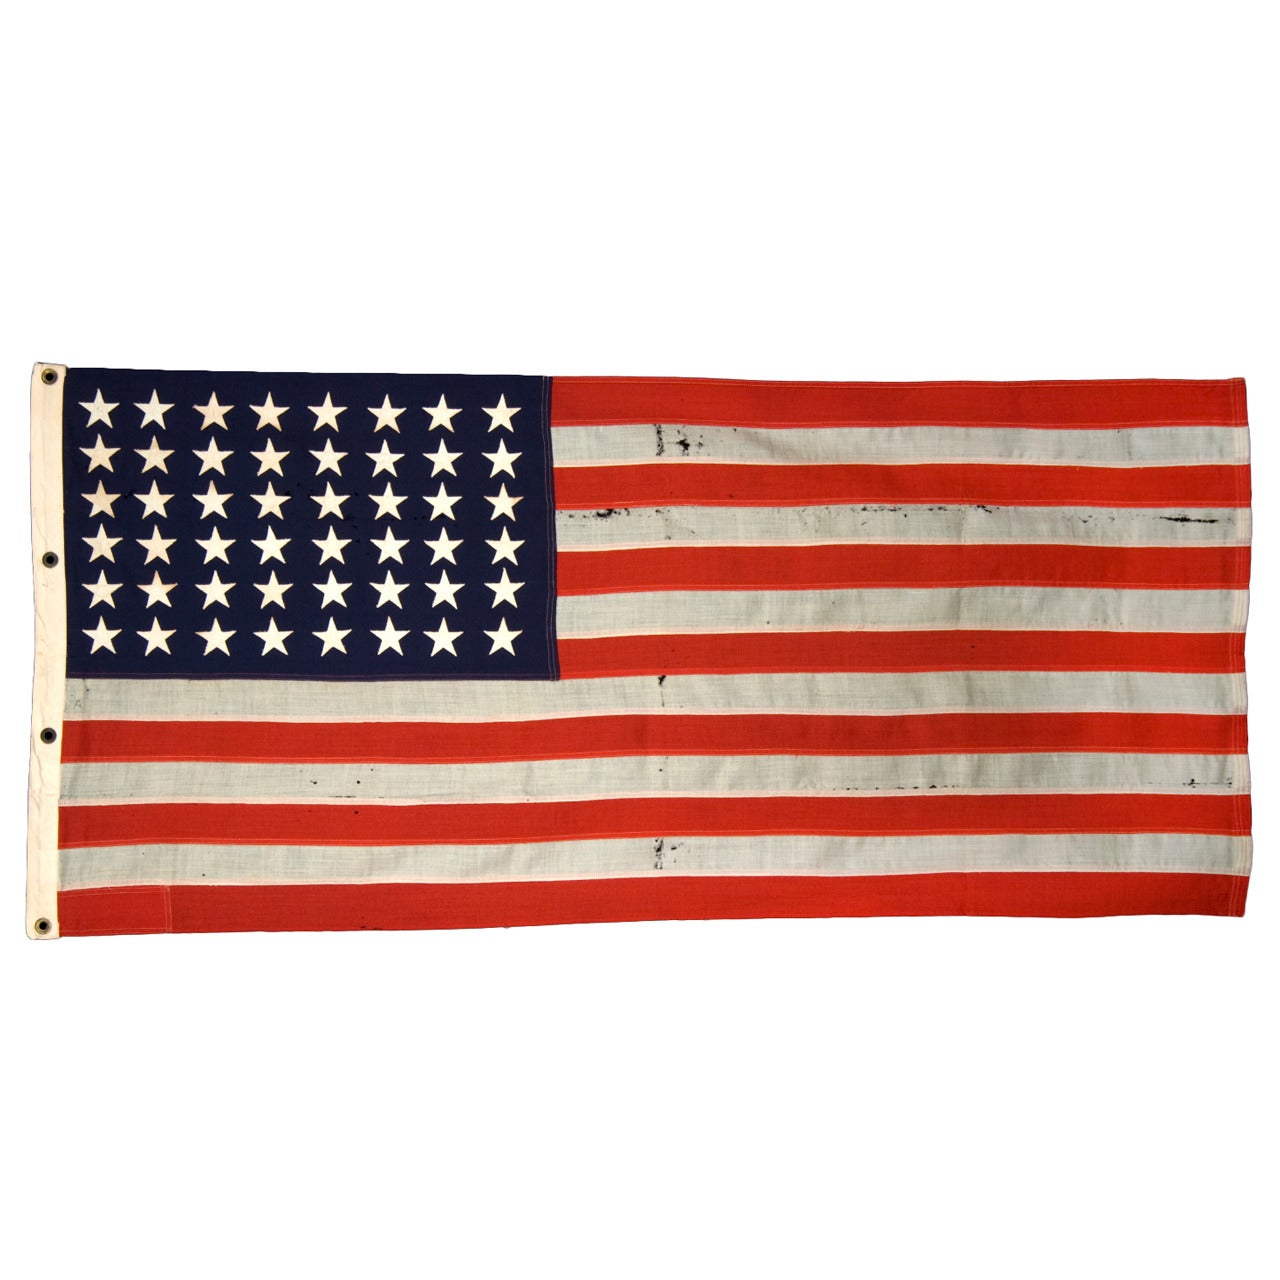 WWII Period 48 Star Flag, made by the U.S. Navy at Mare Island, California